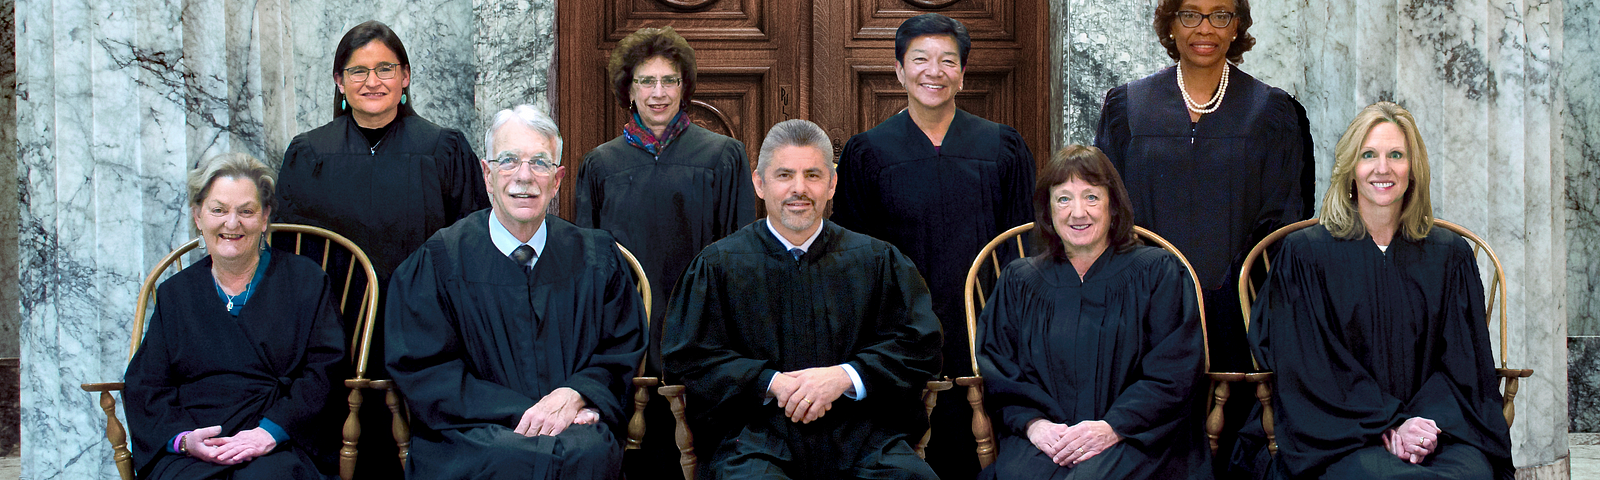 Five justices of the Washington State Supreme Court sit side by side on chairs while four more stand behind them. They are wearing their black robes and are positioned in front of the ornate wooden doors of the court room at the Temple of Justice.